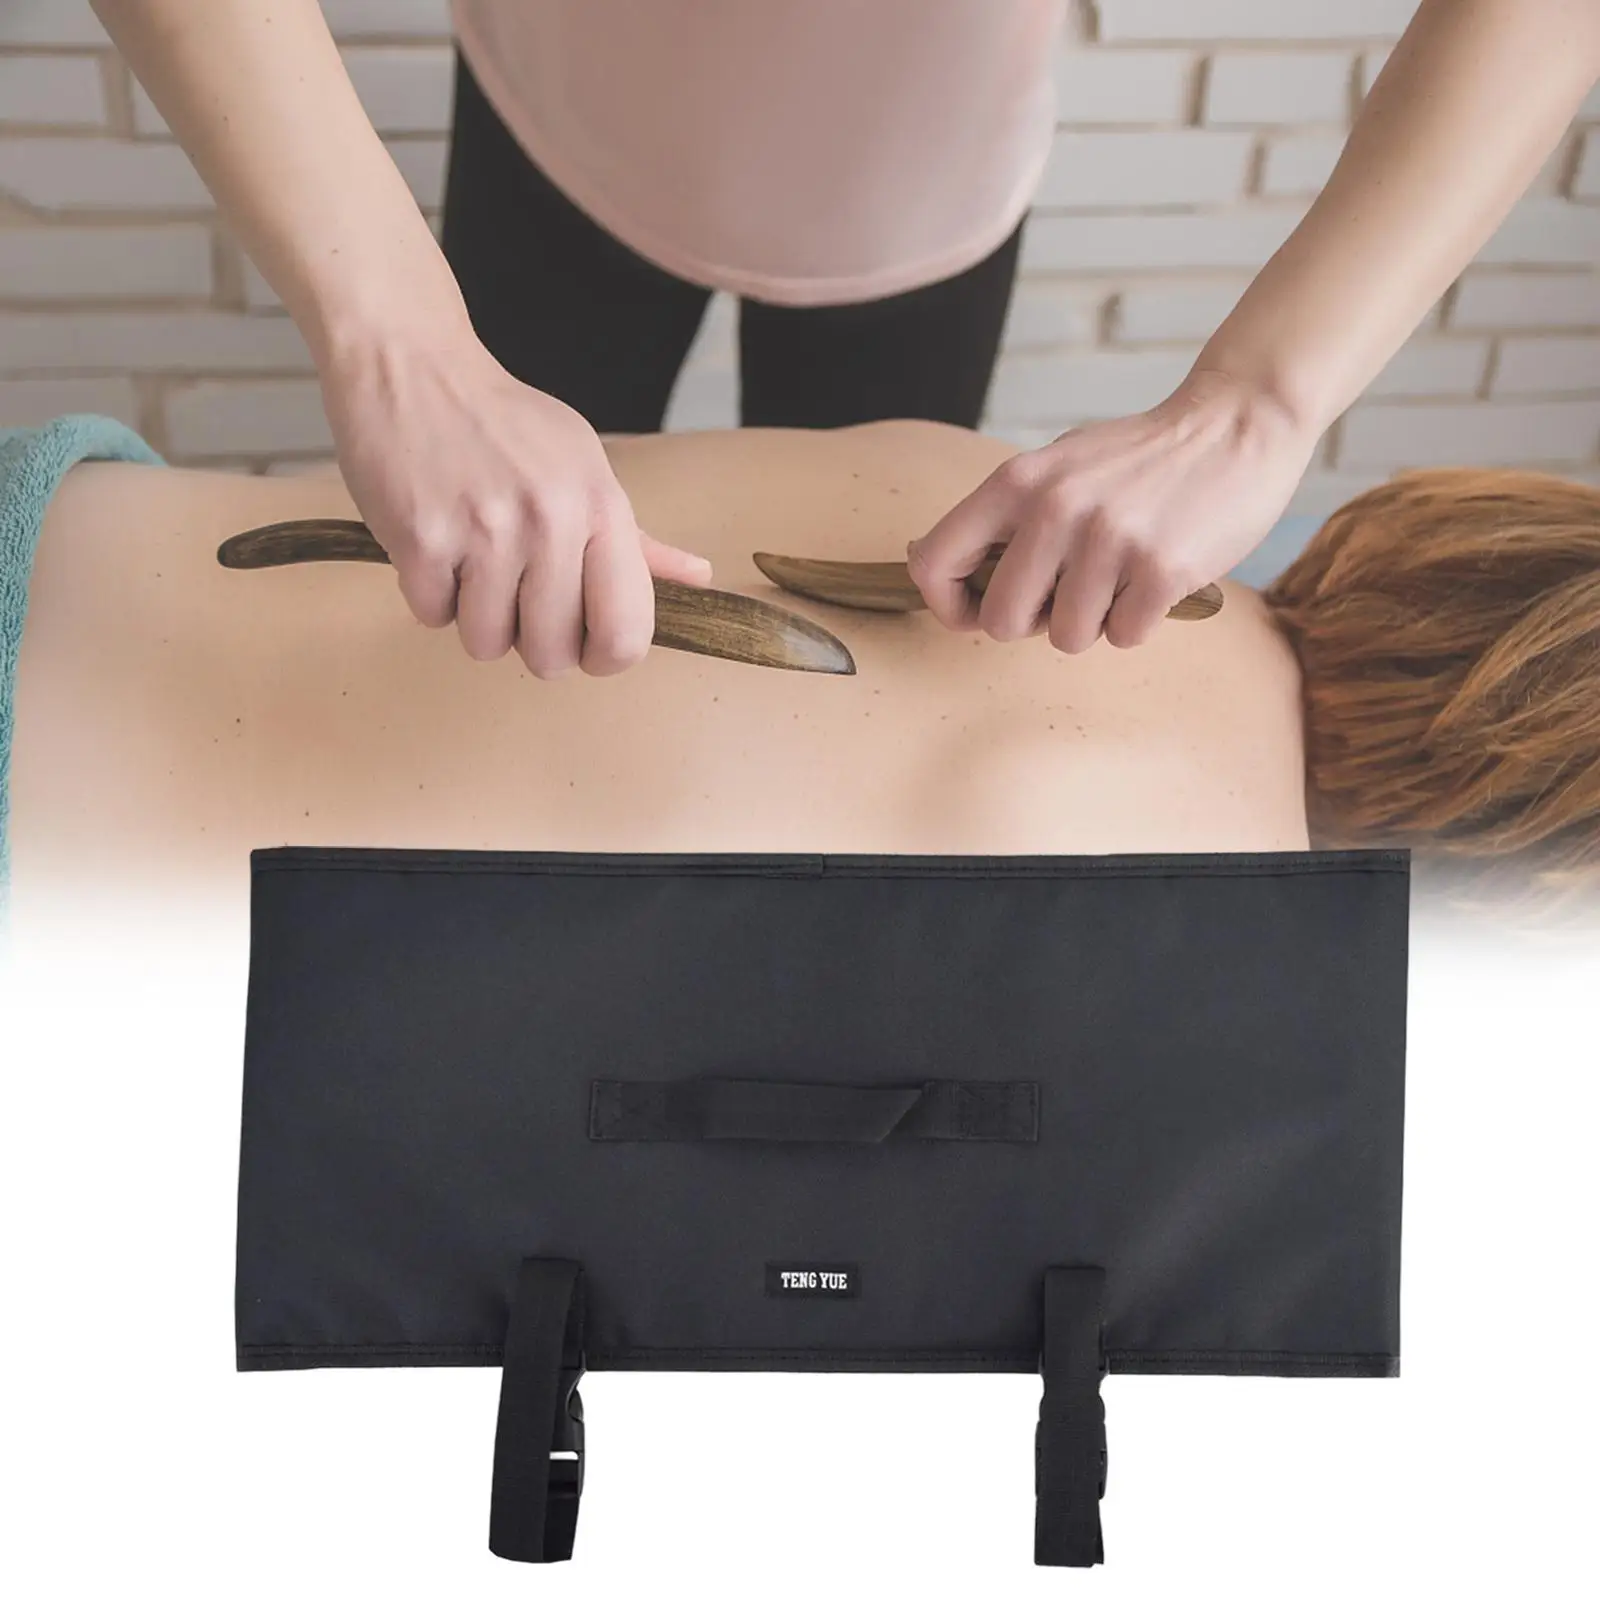 Gua Sha Scrapper Roll Storage Bag Dual Fabric Space Saving Black Carrying Bag for Massage Scrapper Storage Salon Home Office Gym